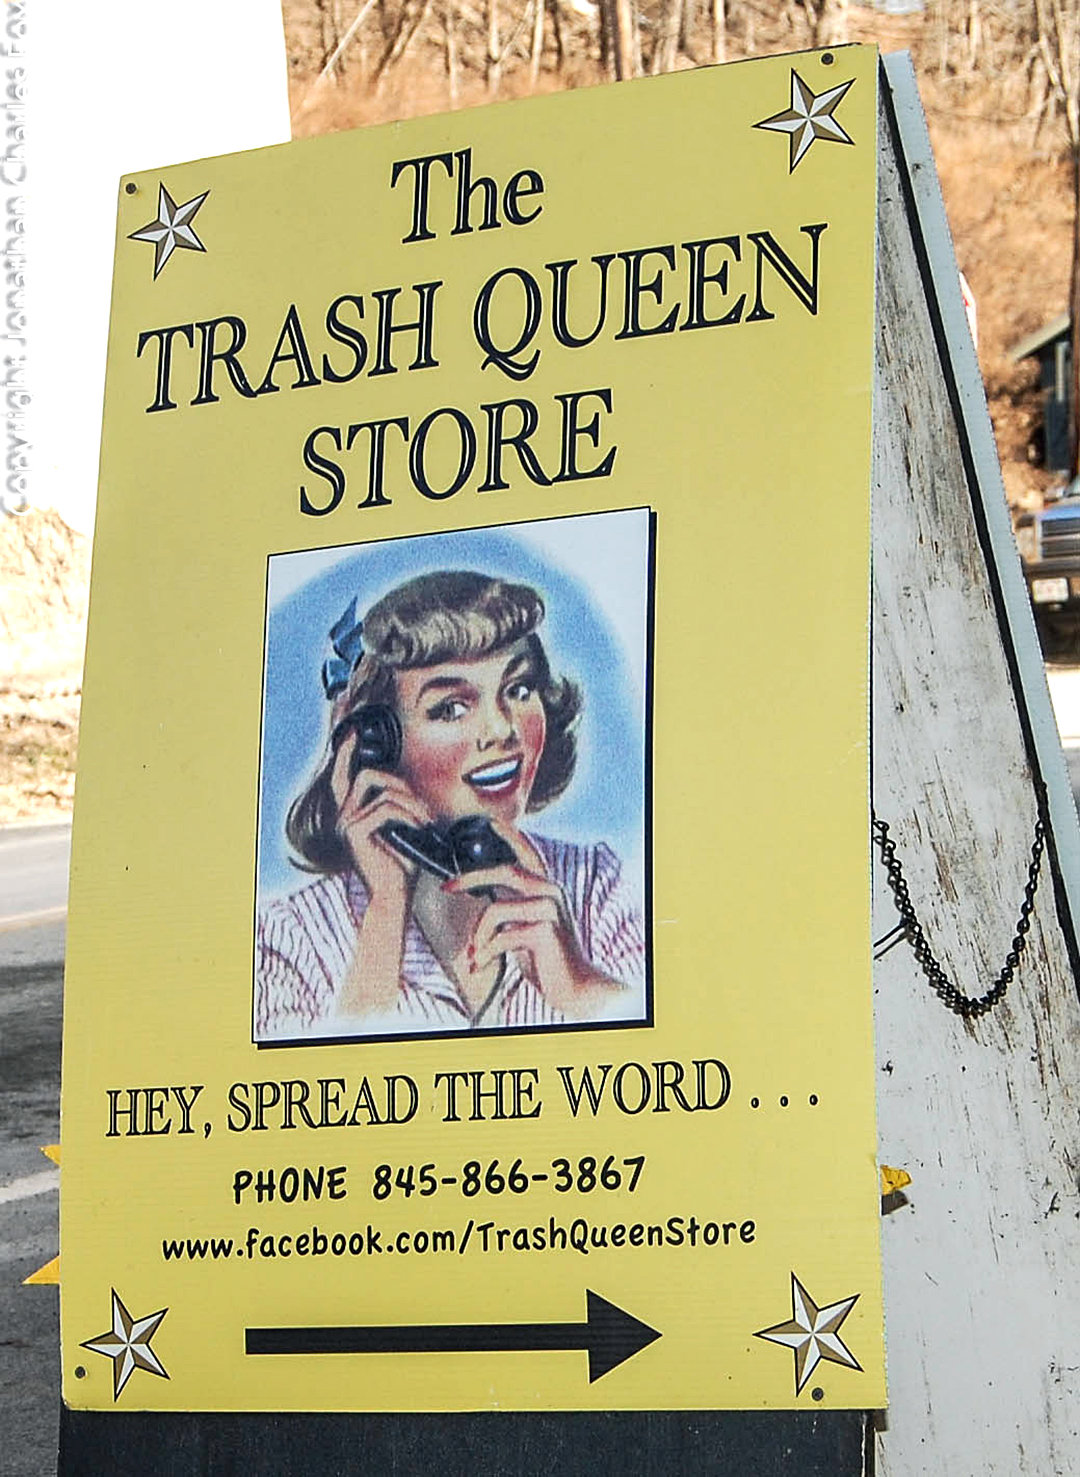 A sign for the Trash Queen store in Callicoon